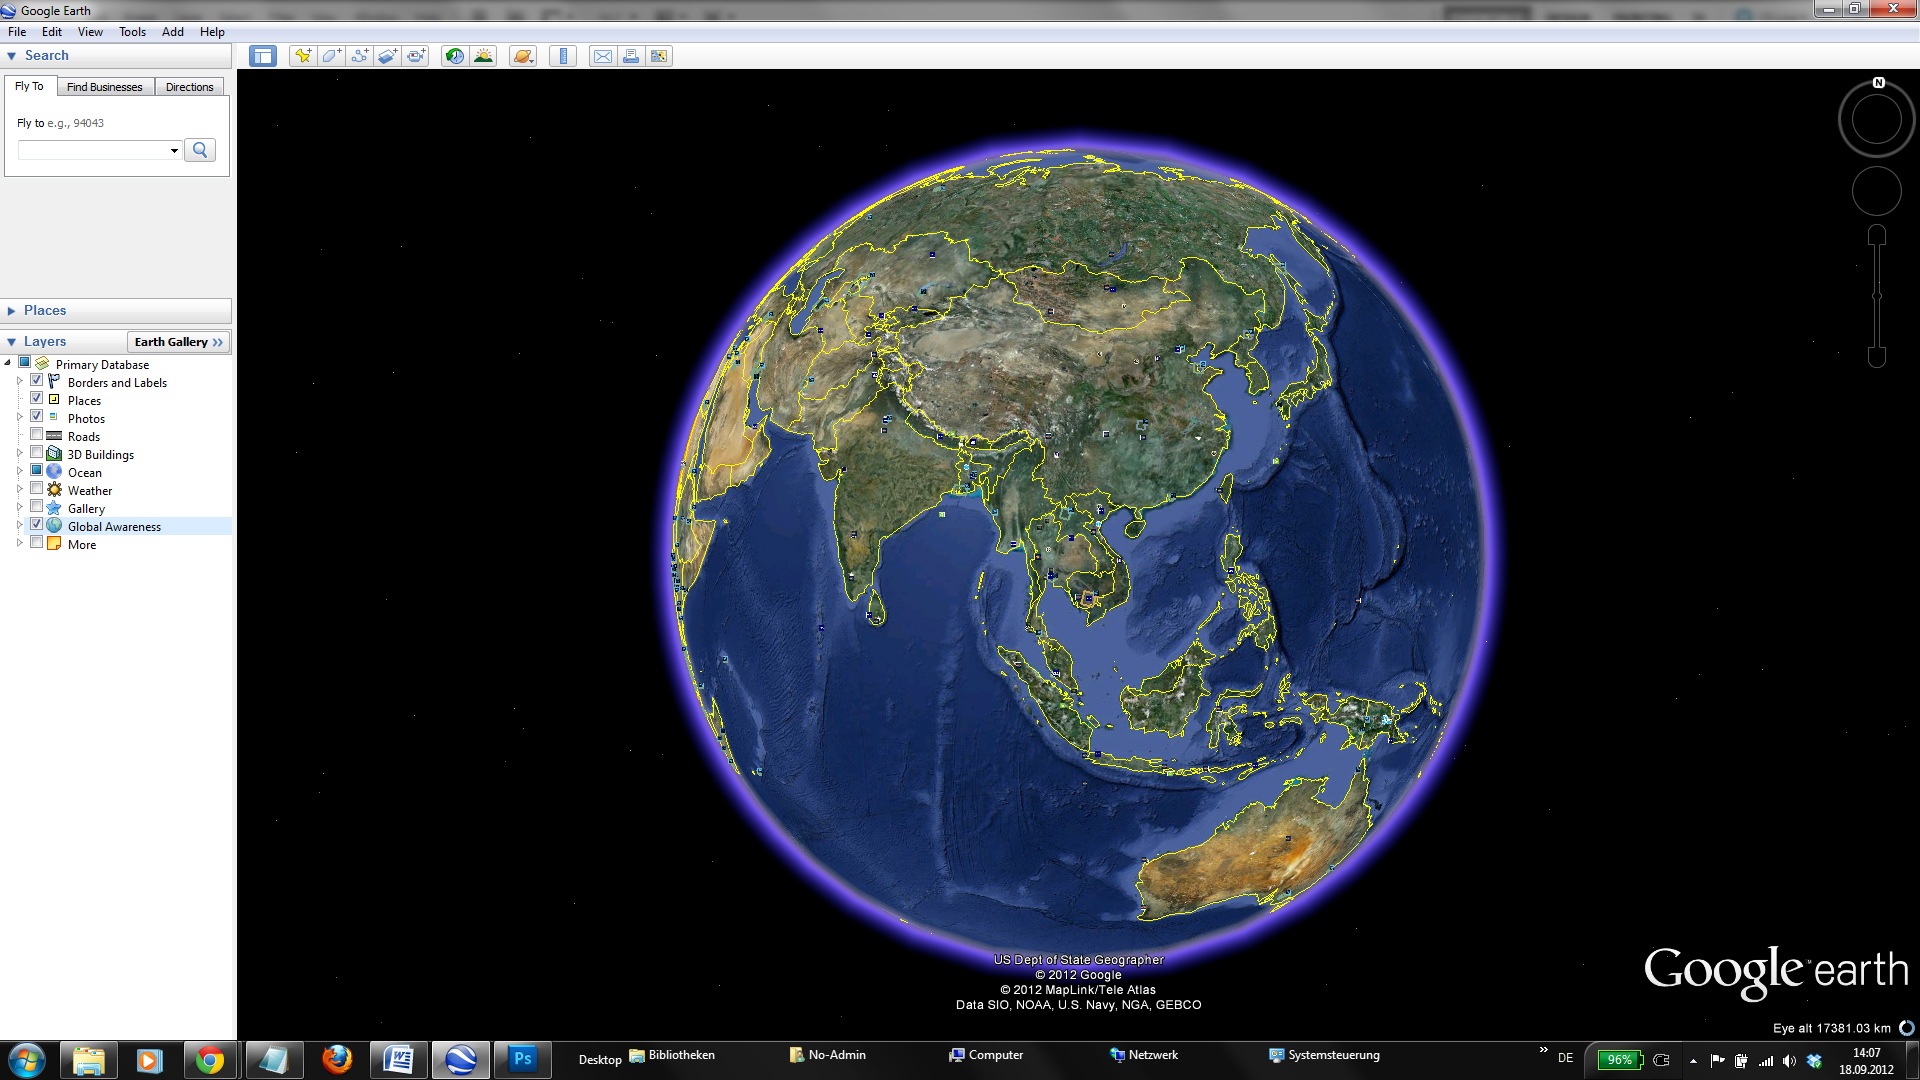 The three-dimensional globe is the the centre-piece of Google Earth